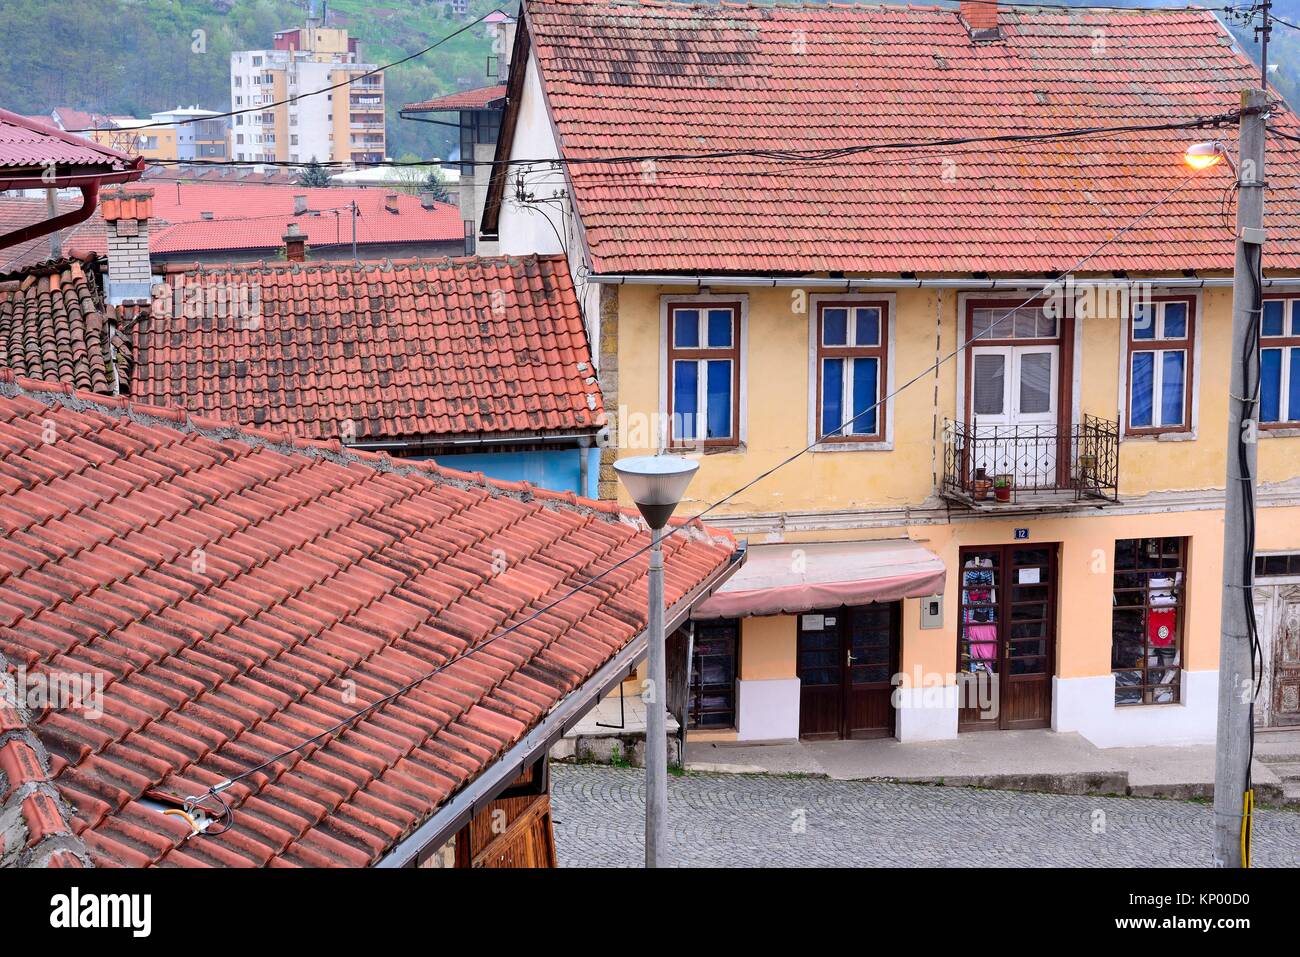 Rooves and facades of Foca, Bosnia and Herzegovina Stock Photo